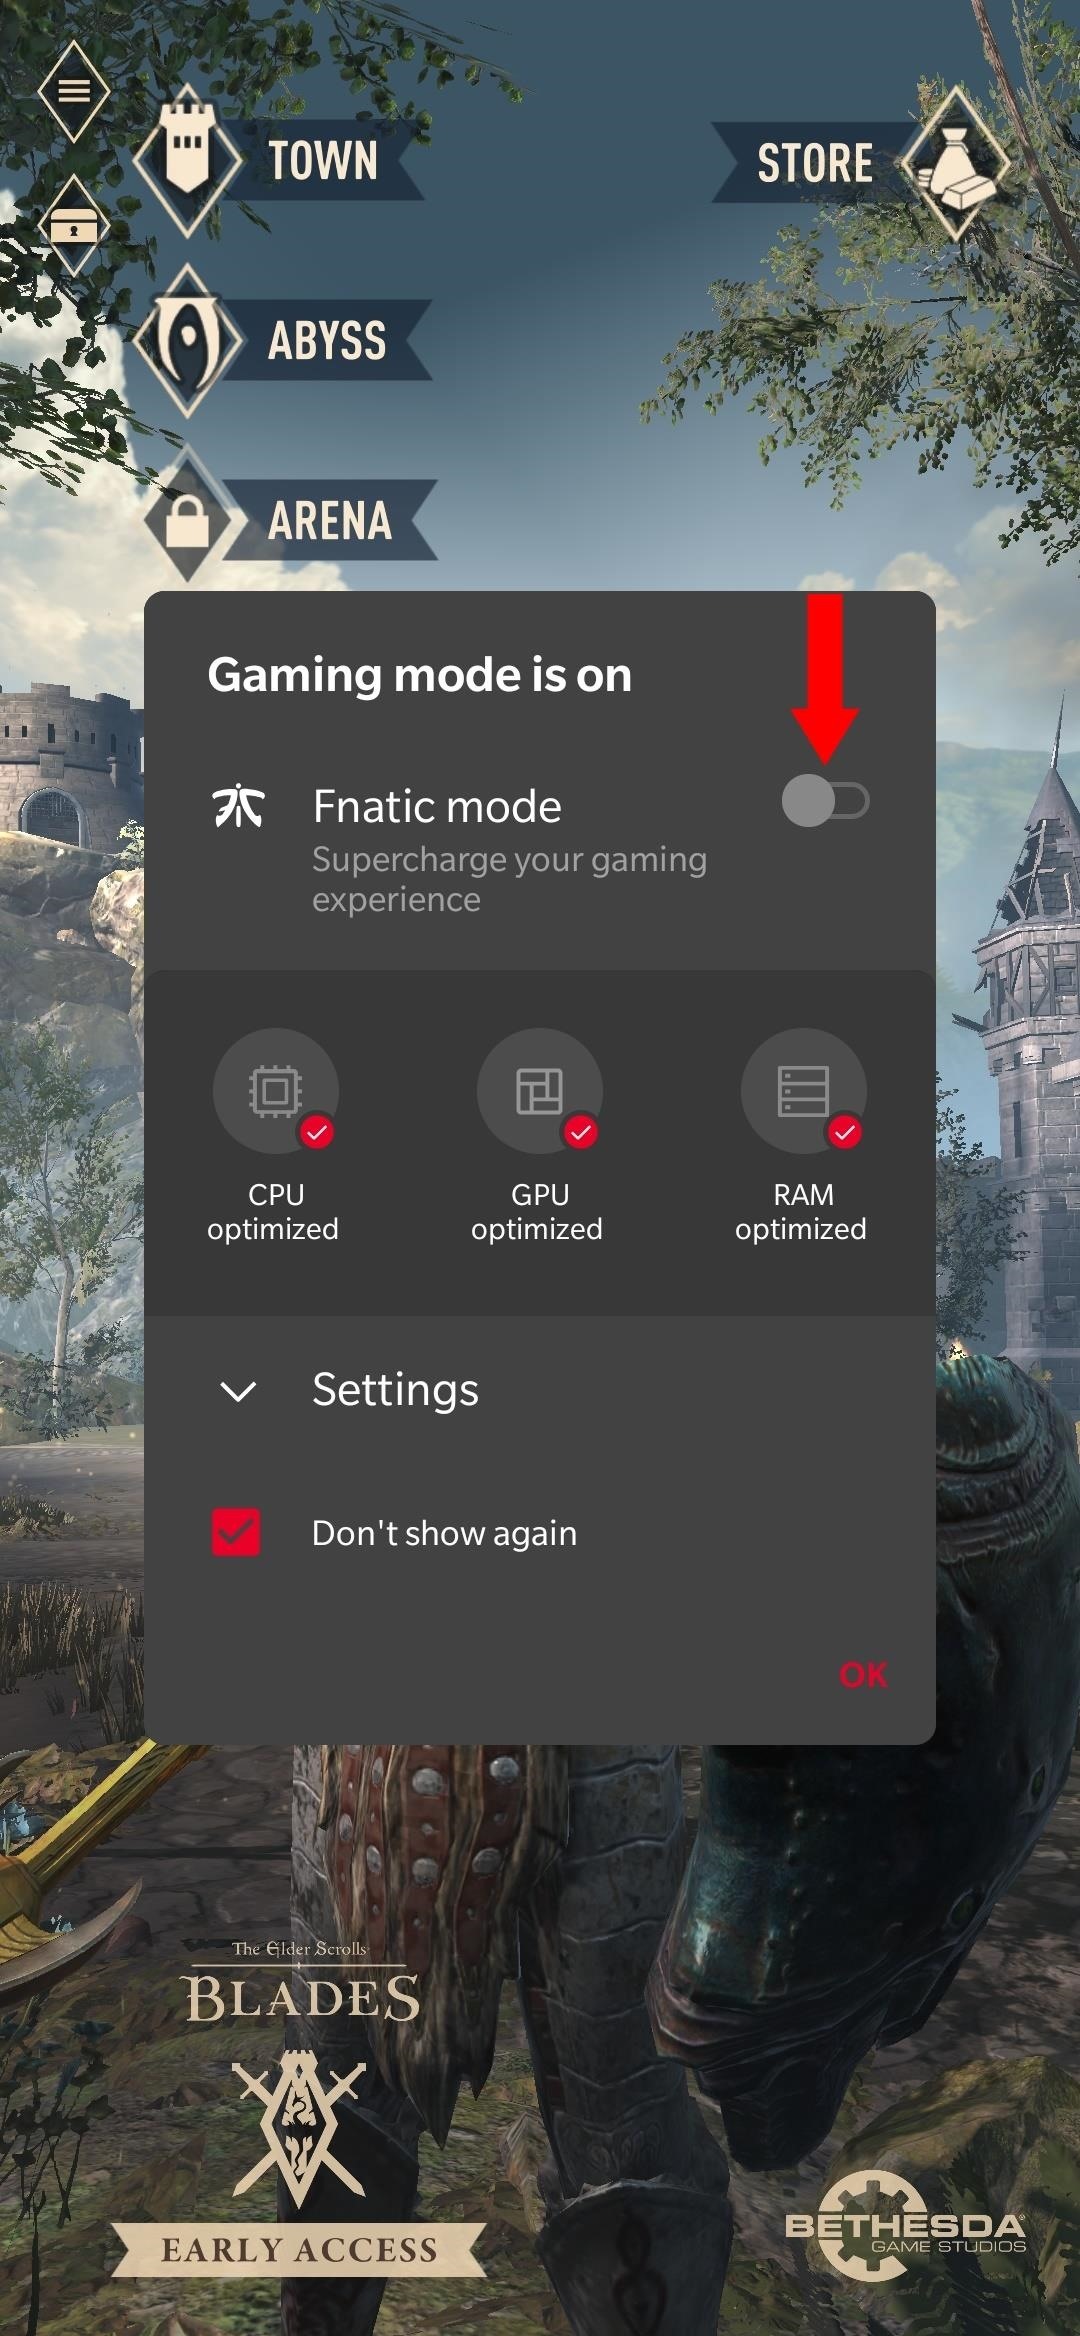 Use Fnatic Mode to Power Up Your OnePlus 7 Pro Gaming Experience